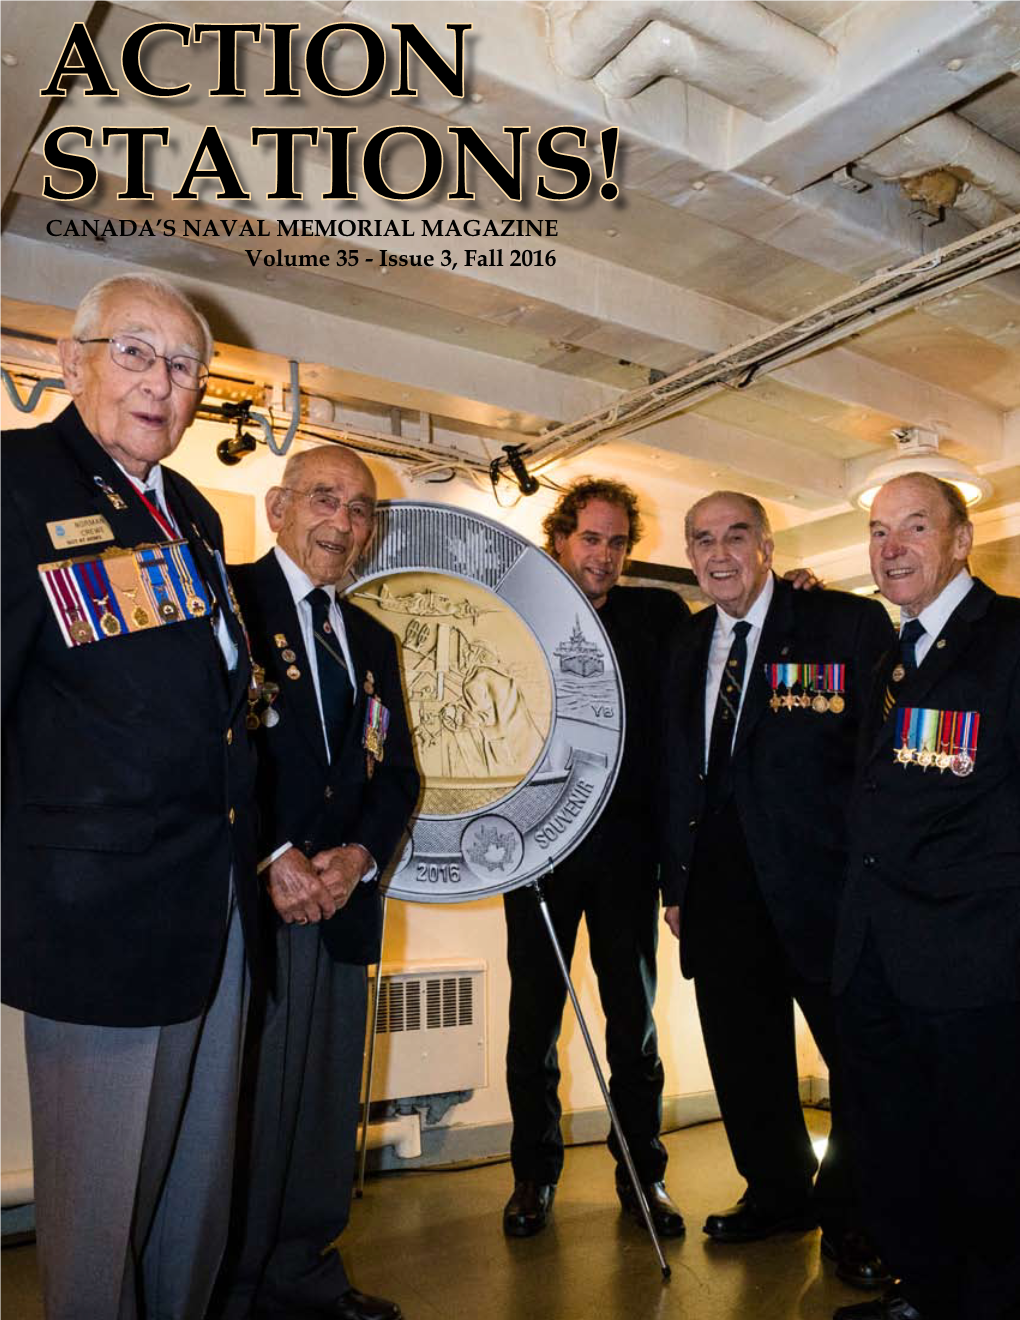 ACTION STATIONS! CANADA’S NAVAL MEMORIAL MAGAZINE Volume 35 - Issue 3, Fall 2016